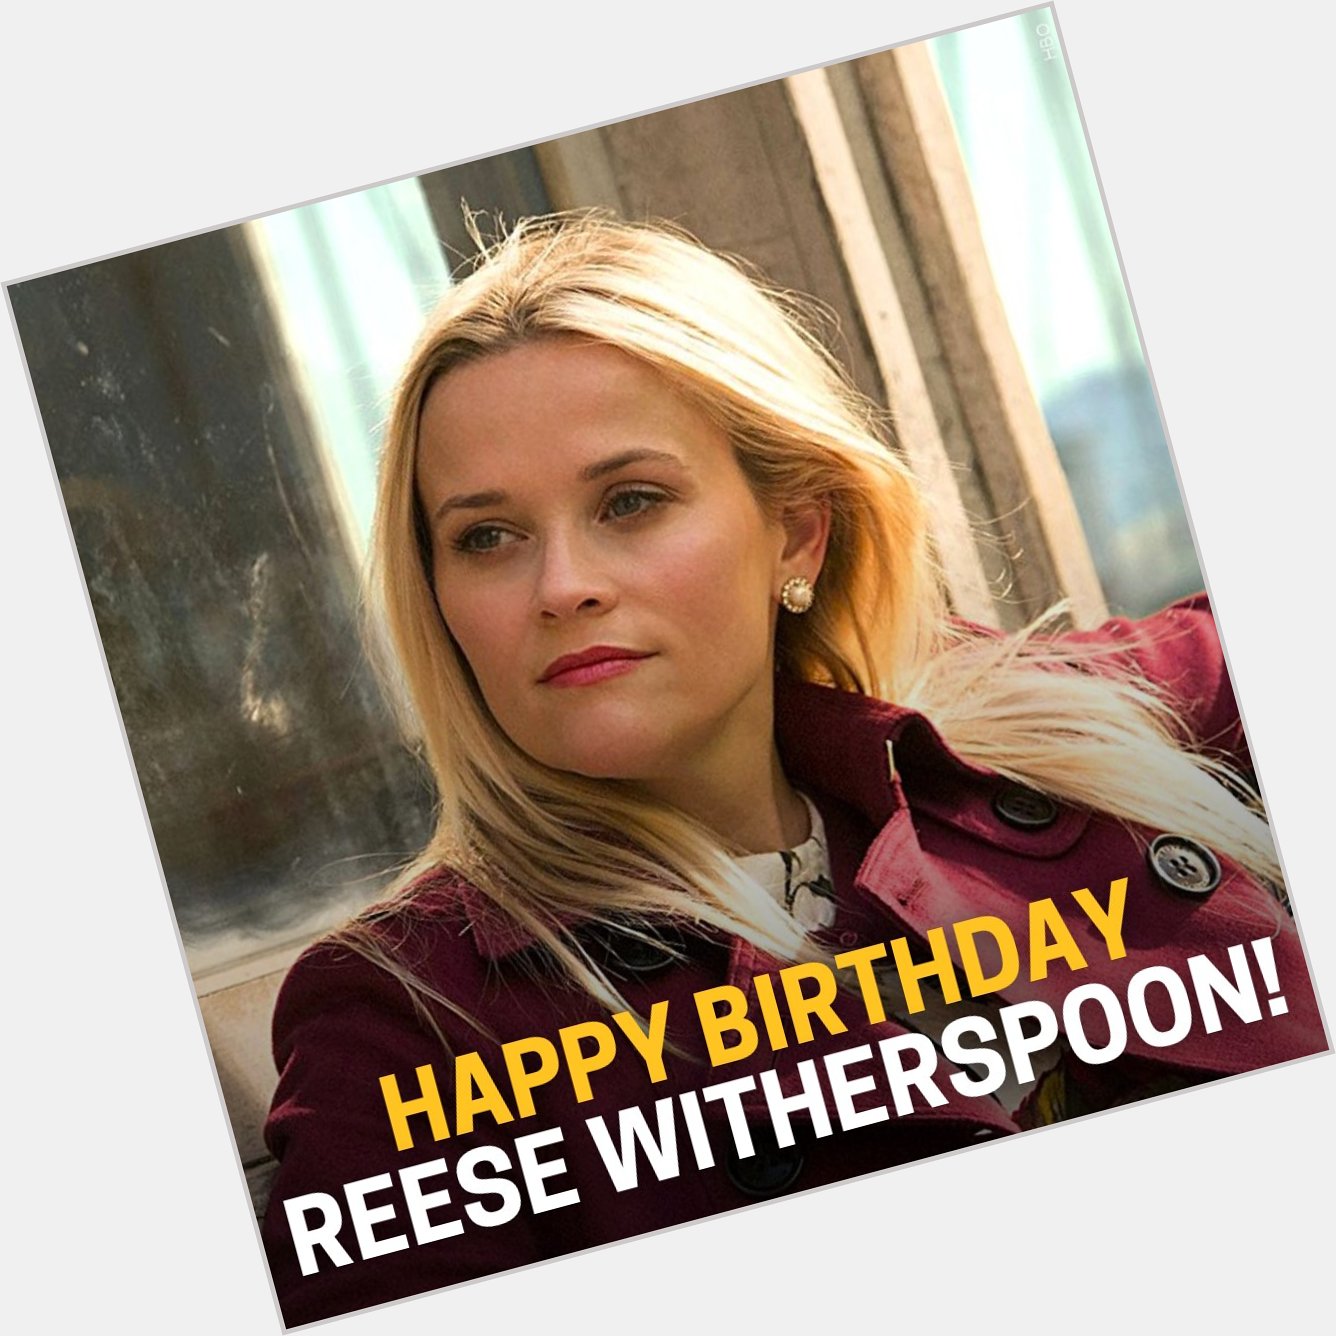 Happy Birthday, Reese Witherspoon! 